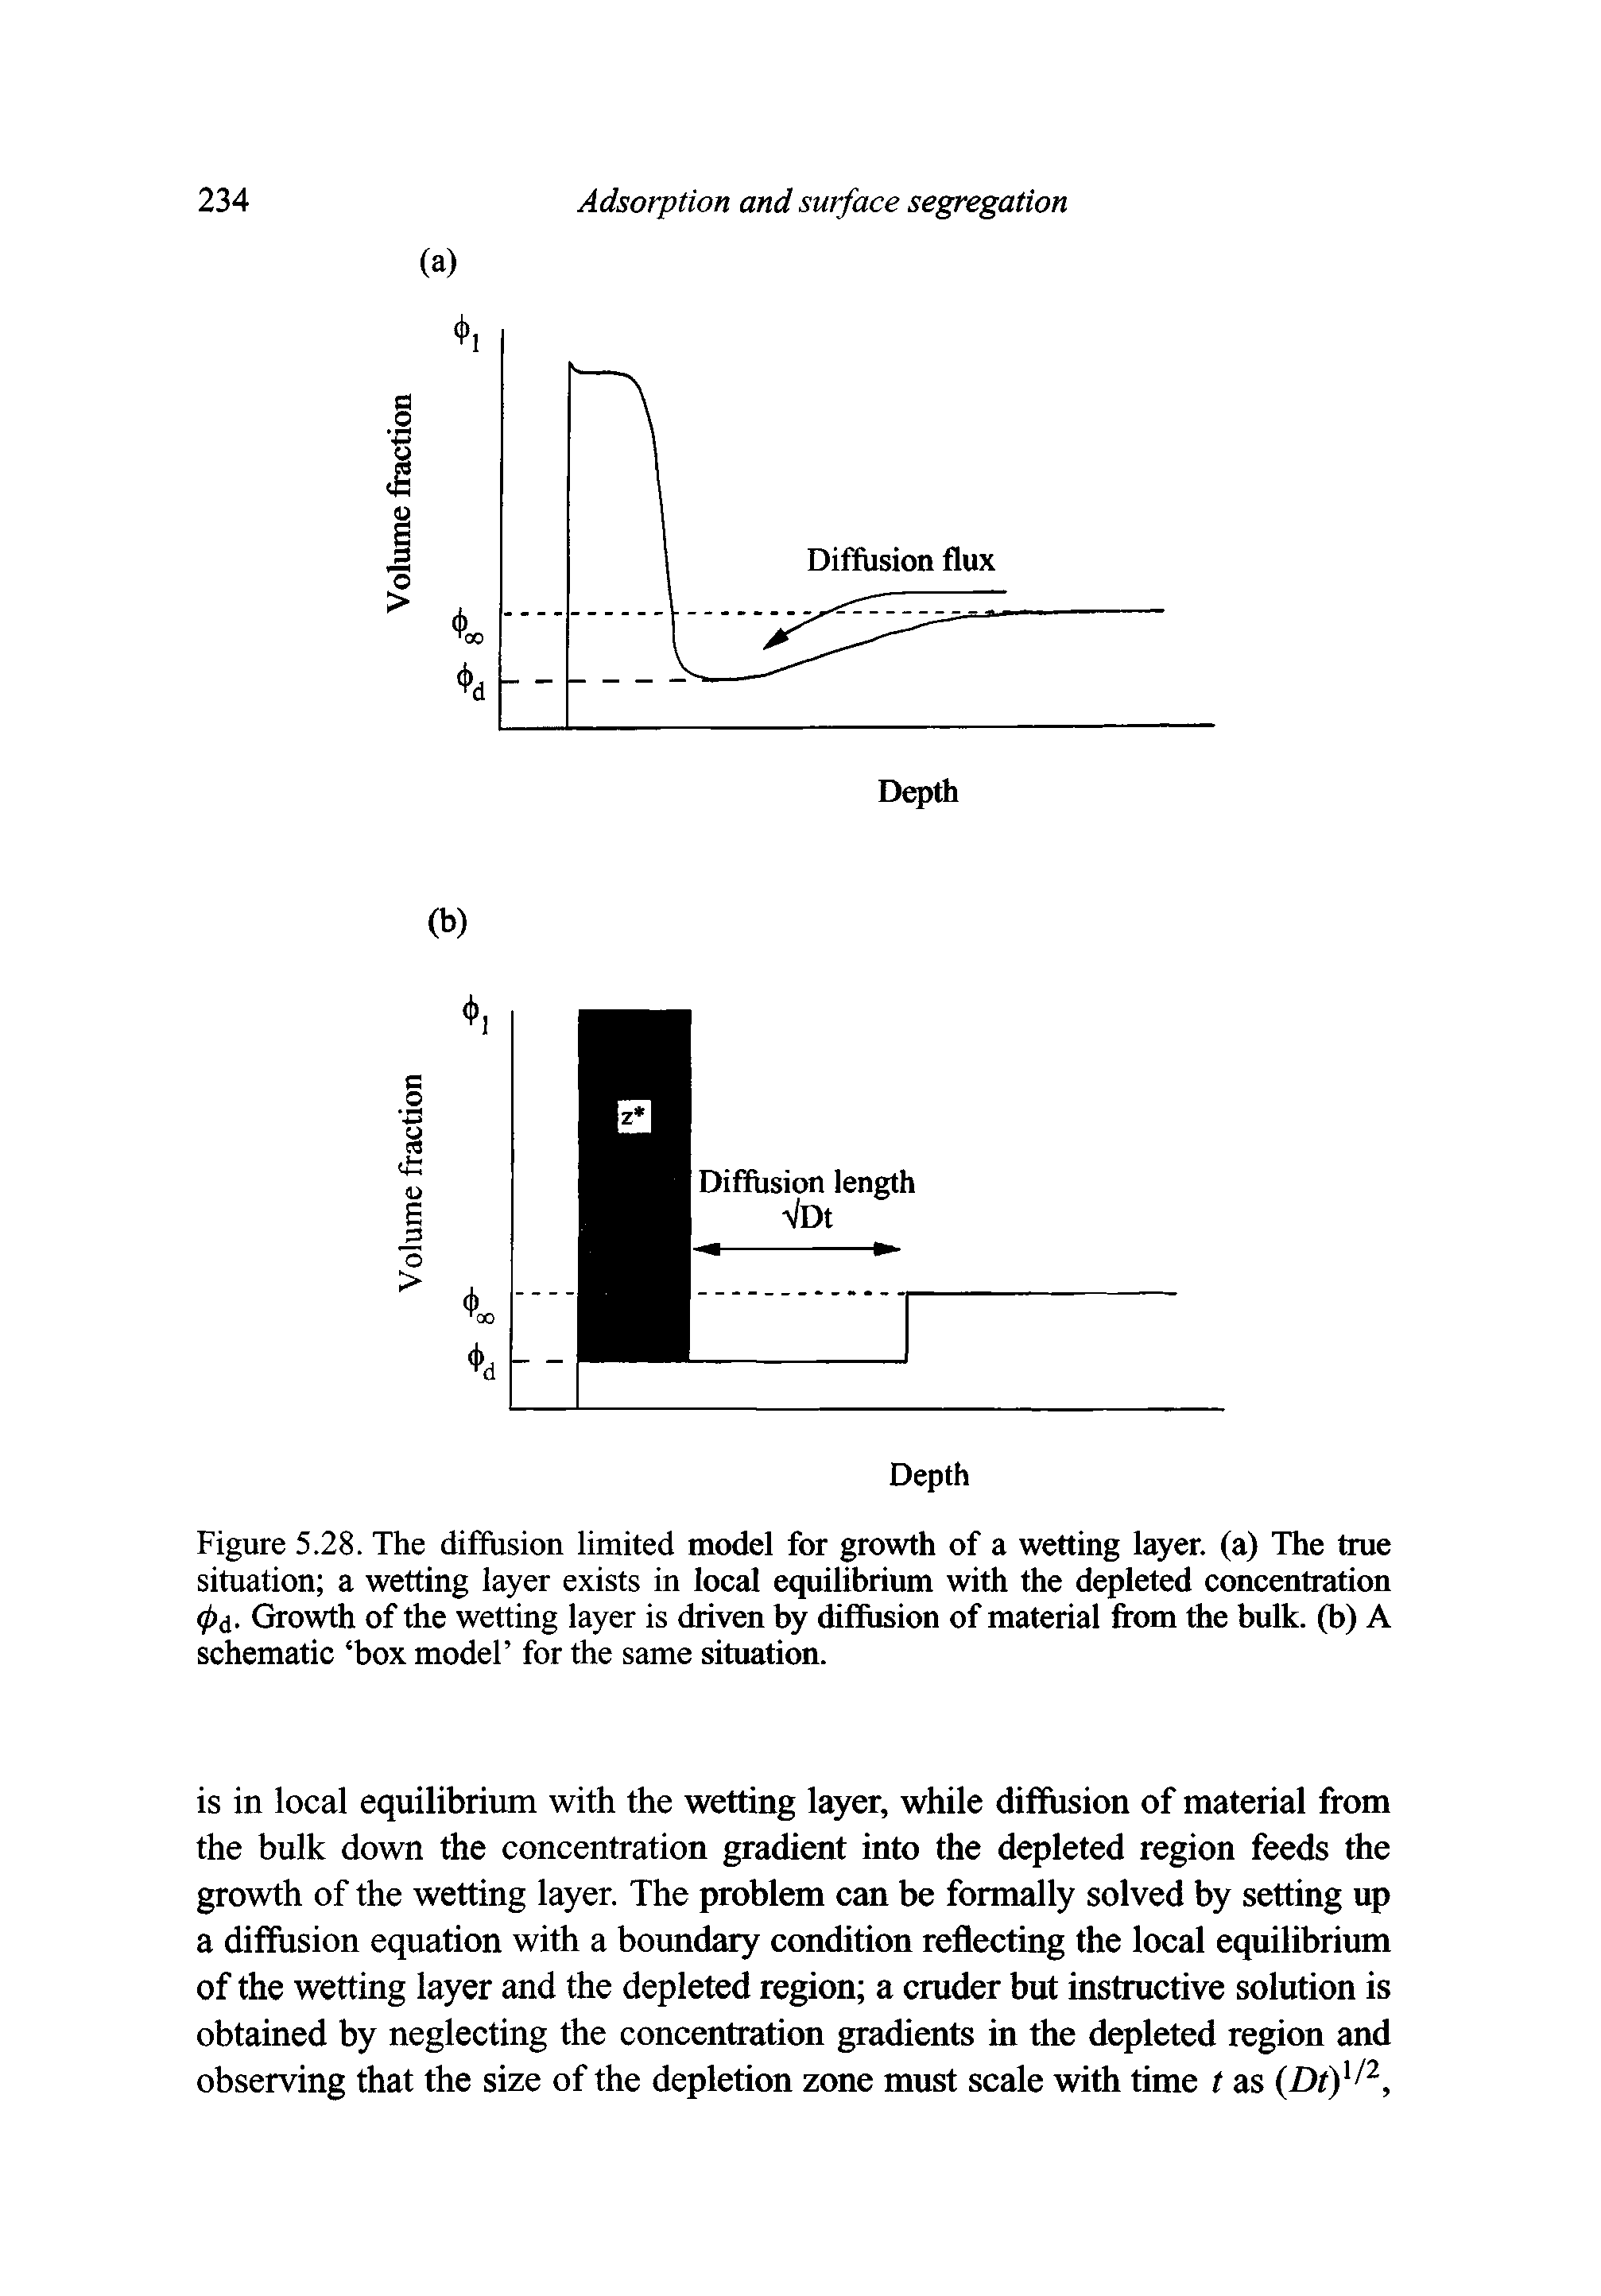 Figure 5.28. The diffusion limited model for growth of a wetting layer, (a) The true situation a wetting layer exists in local equilibrium with the depleted concentration (f>i. Growth of the wetting layer is driven by diffusion of material from the bulk, (b) A schematic box model for the same situation.